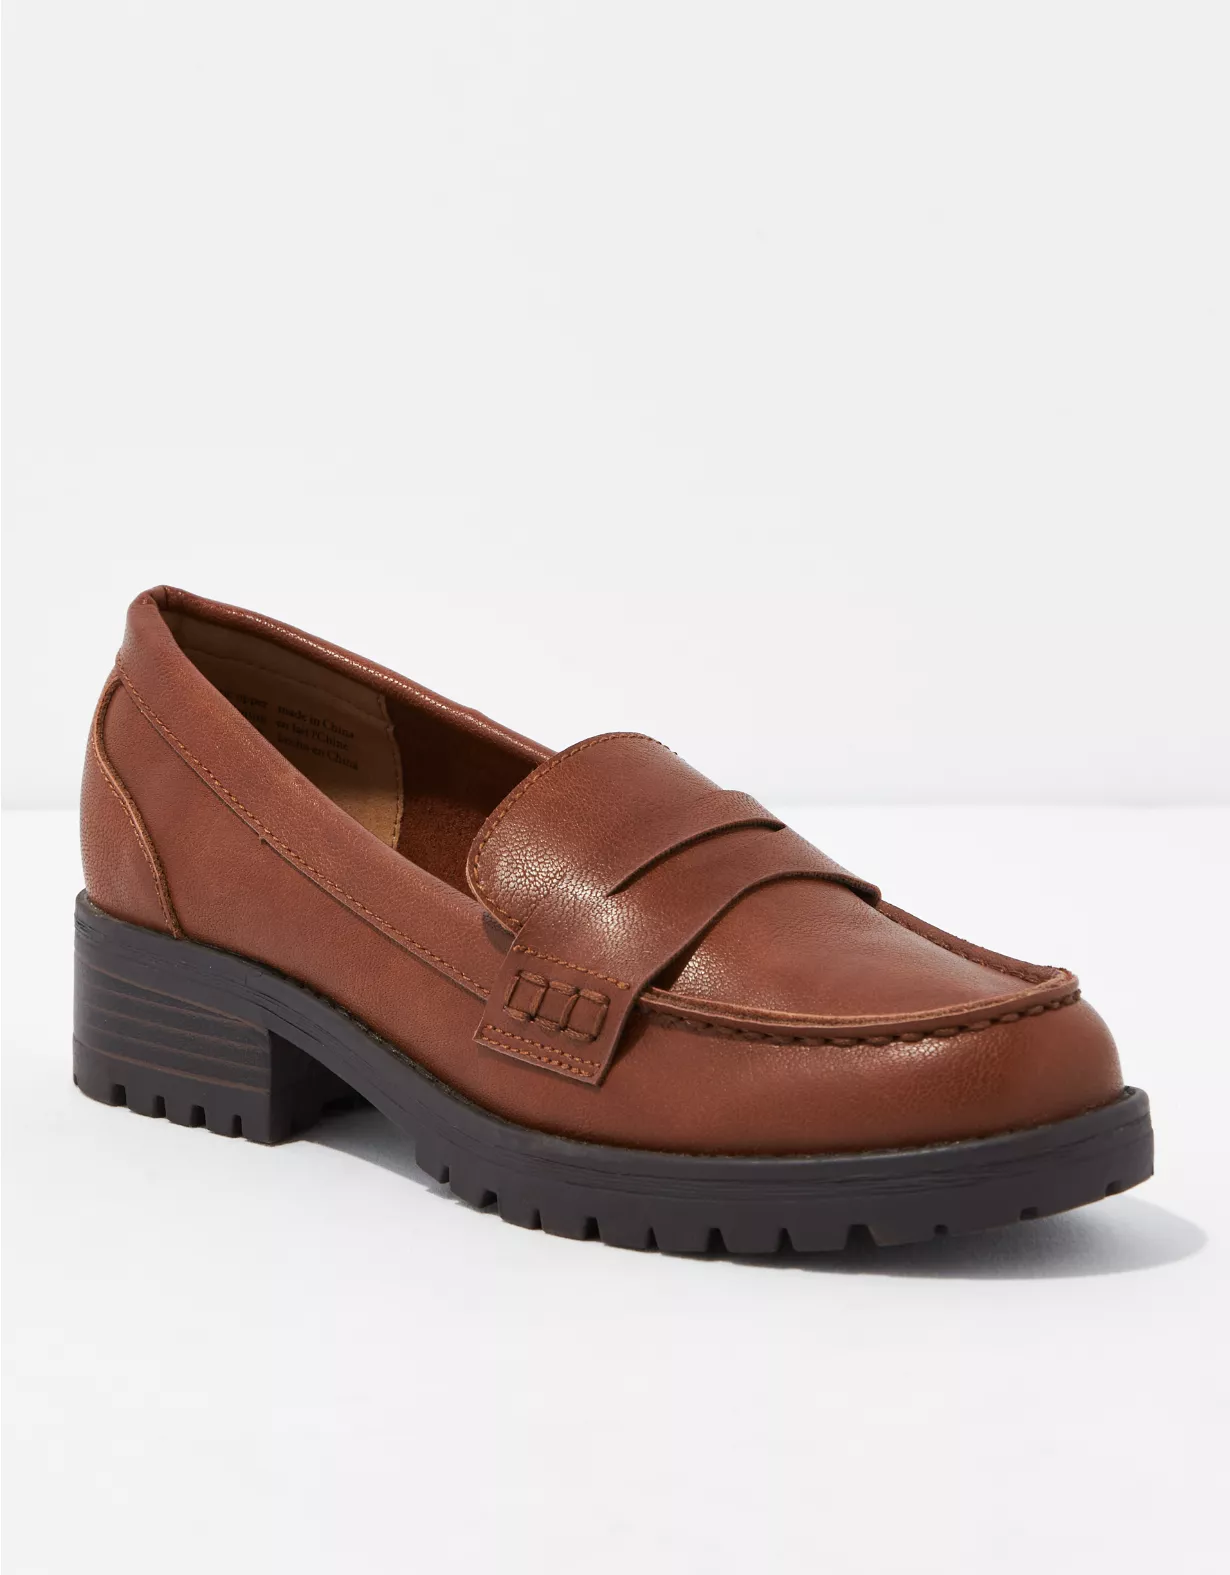 BC Footwear Roulette Loafer